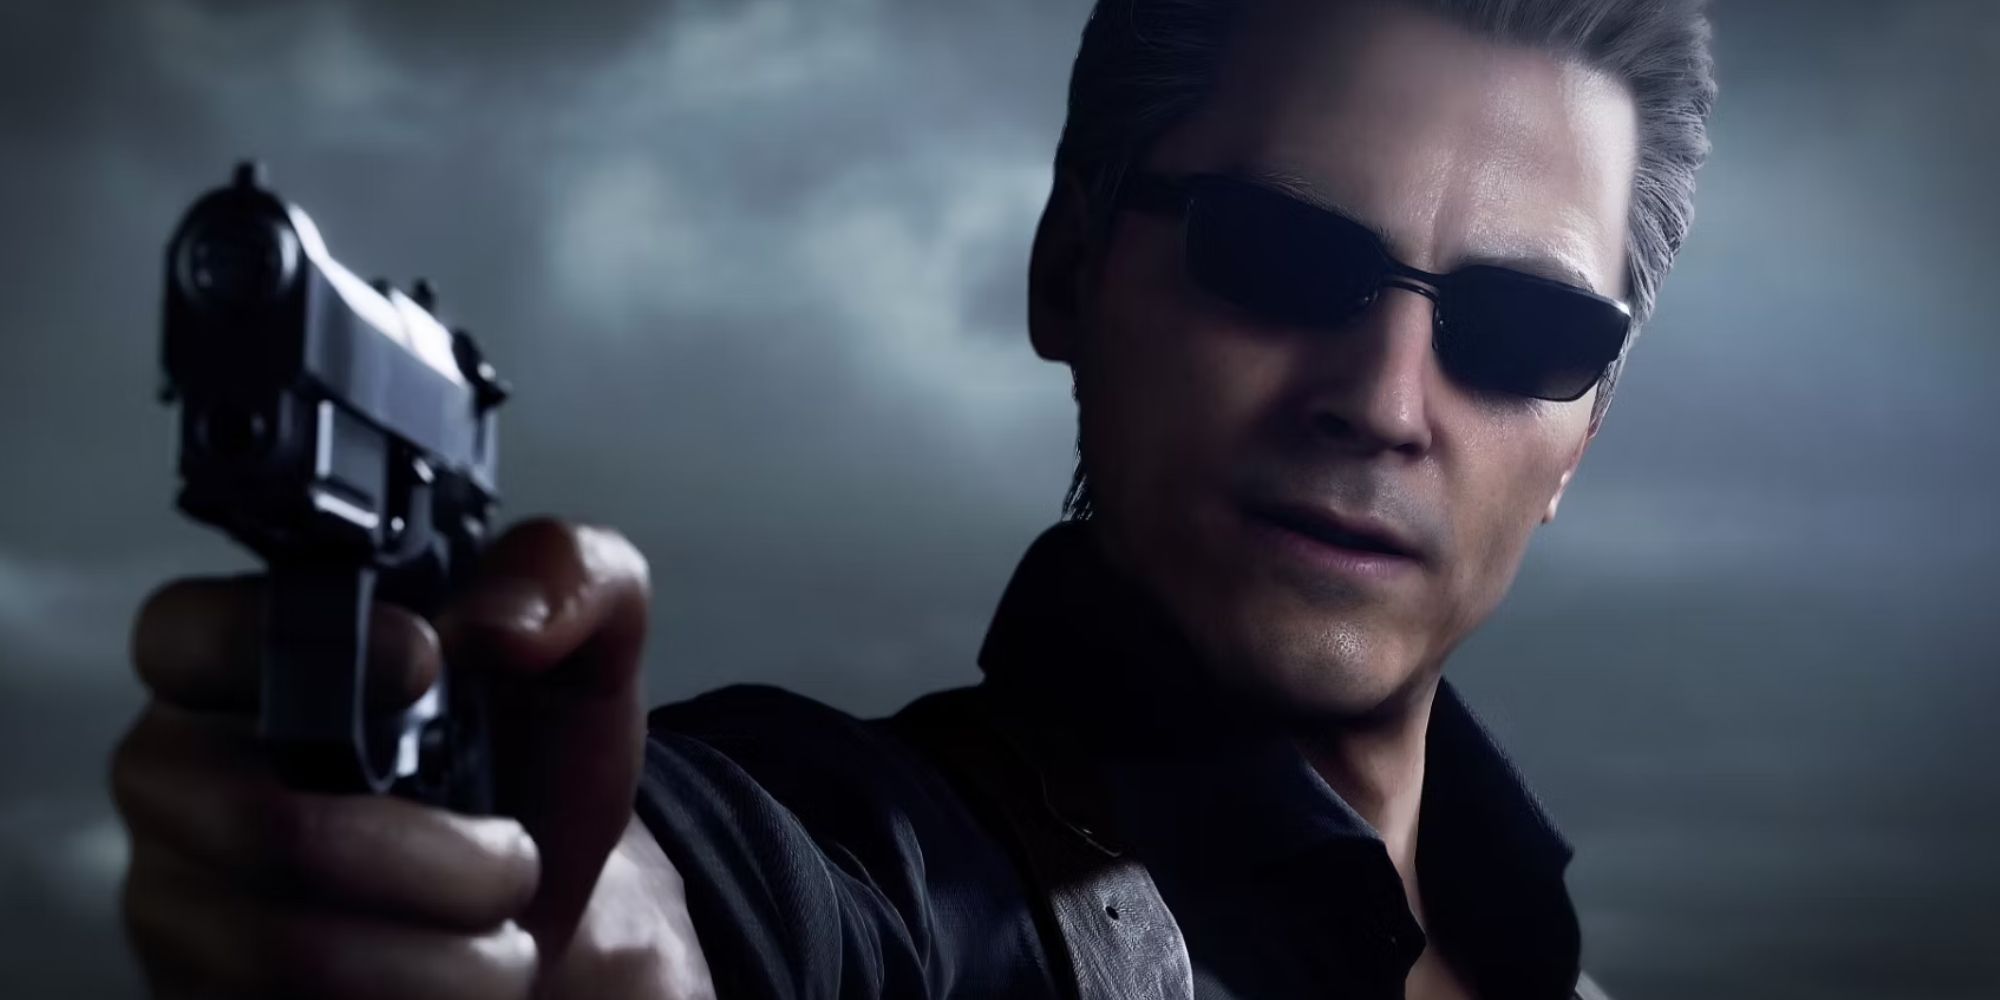 Albert Wesker pointing a gun at an off-screen character in the Separate Ways DLC.